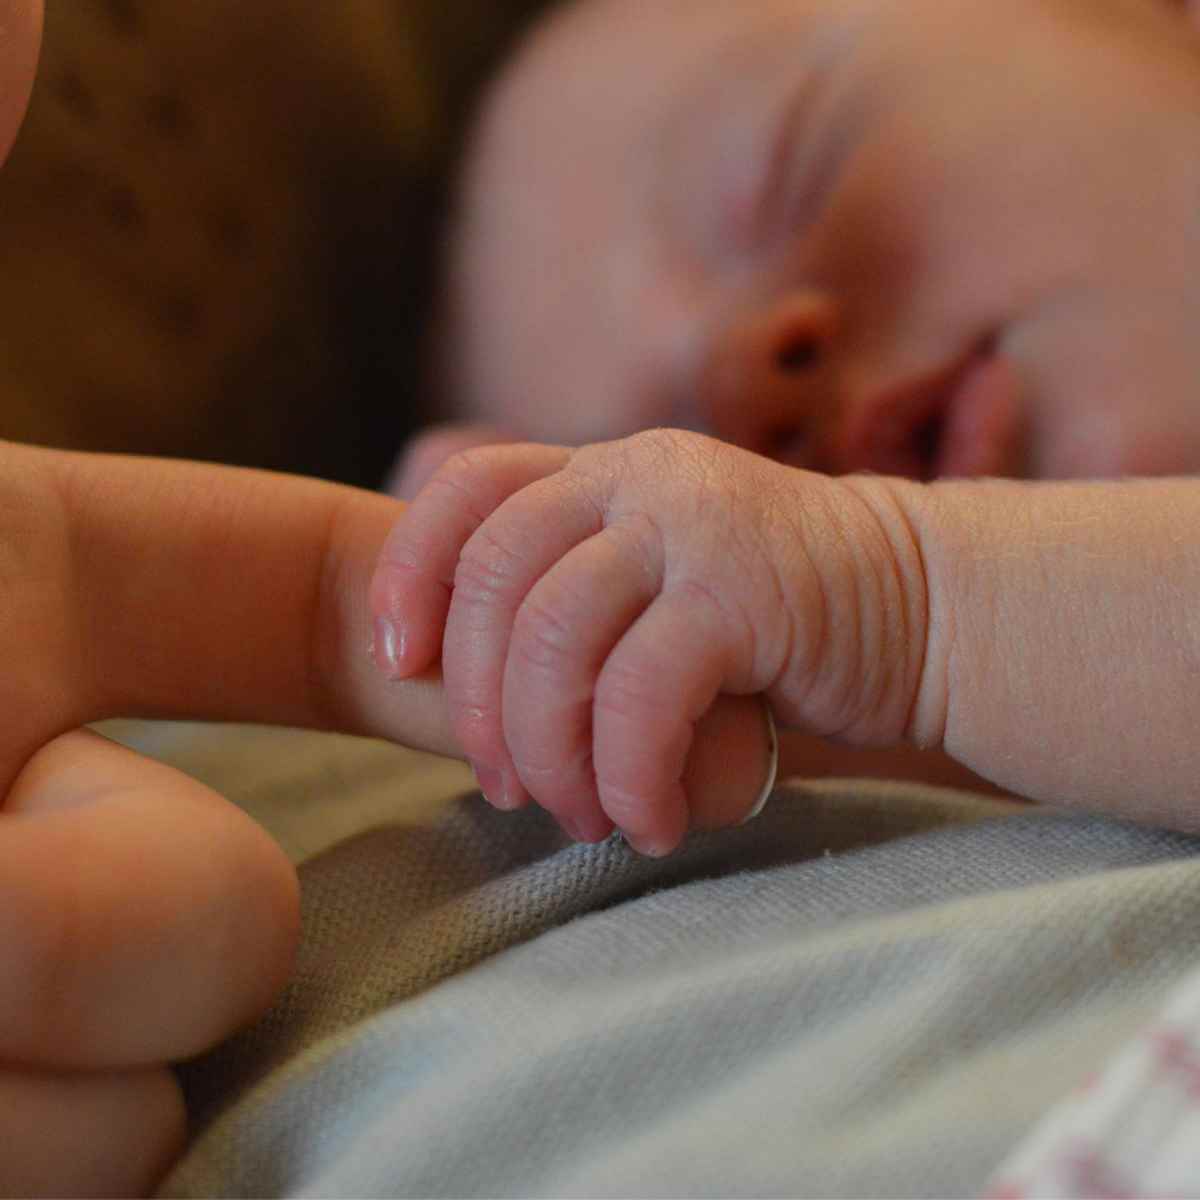 I don’t feel an attachment to my newborn – what does this mean and what can I do?